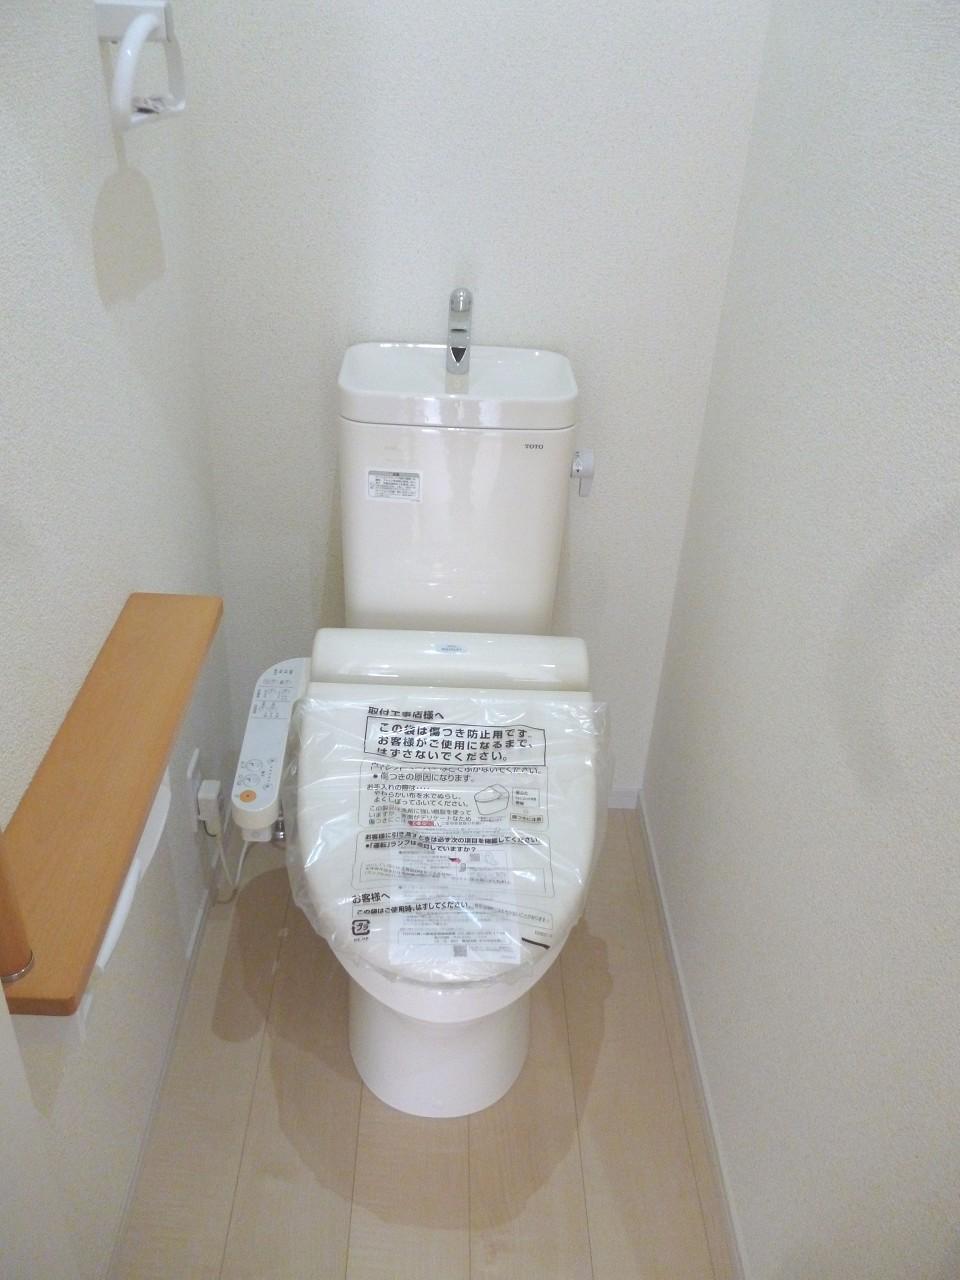 Toilet. Building 2 Bidet with function